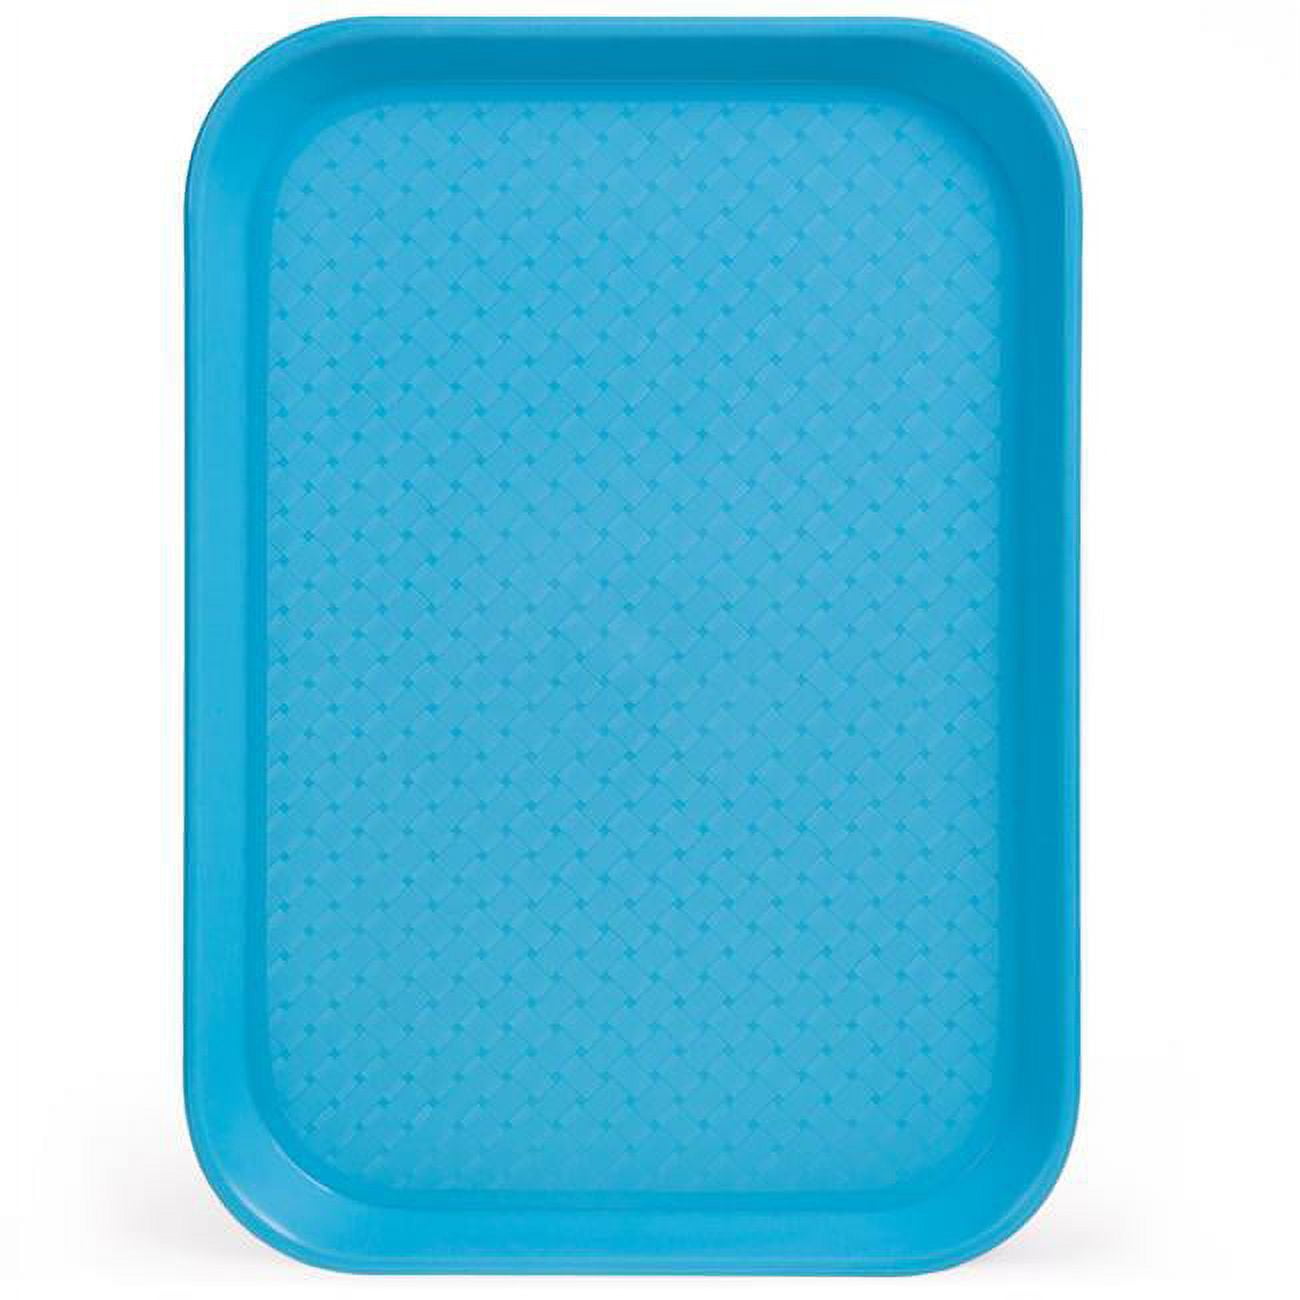 Kcaf-102 10 X 14 In. Cafeteria Tray, Blue